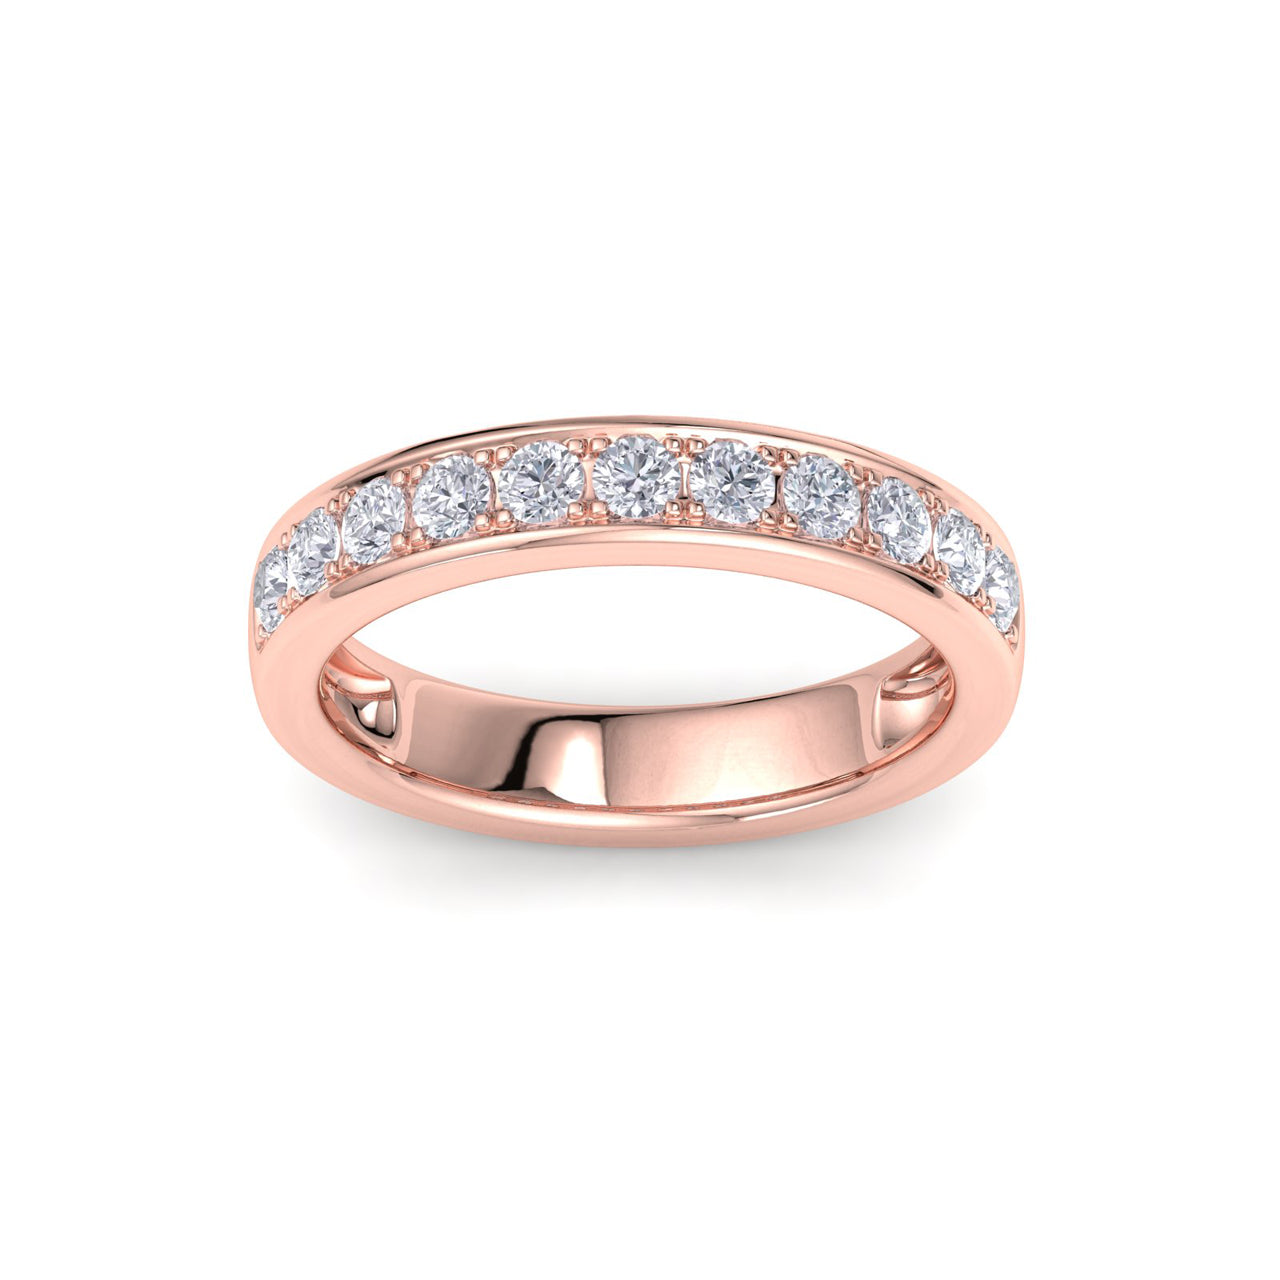 Channel set ring in white gold with white diamonds of 0.77 ct in weight